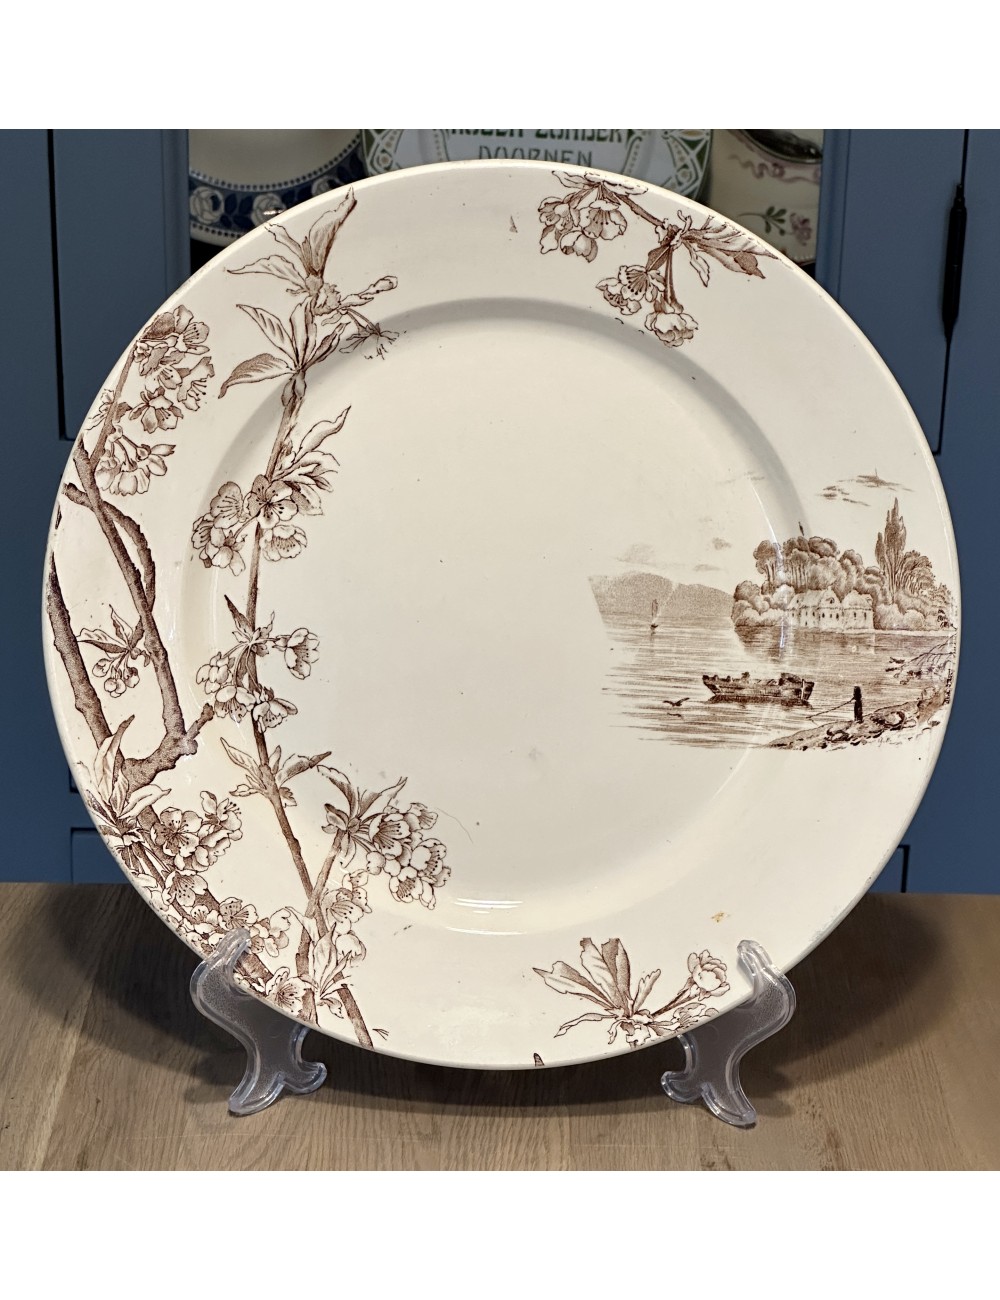 Plate - large model - Creil & Montereau - SERVICE CERISIERS in brown with cherry blossom